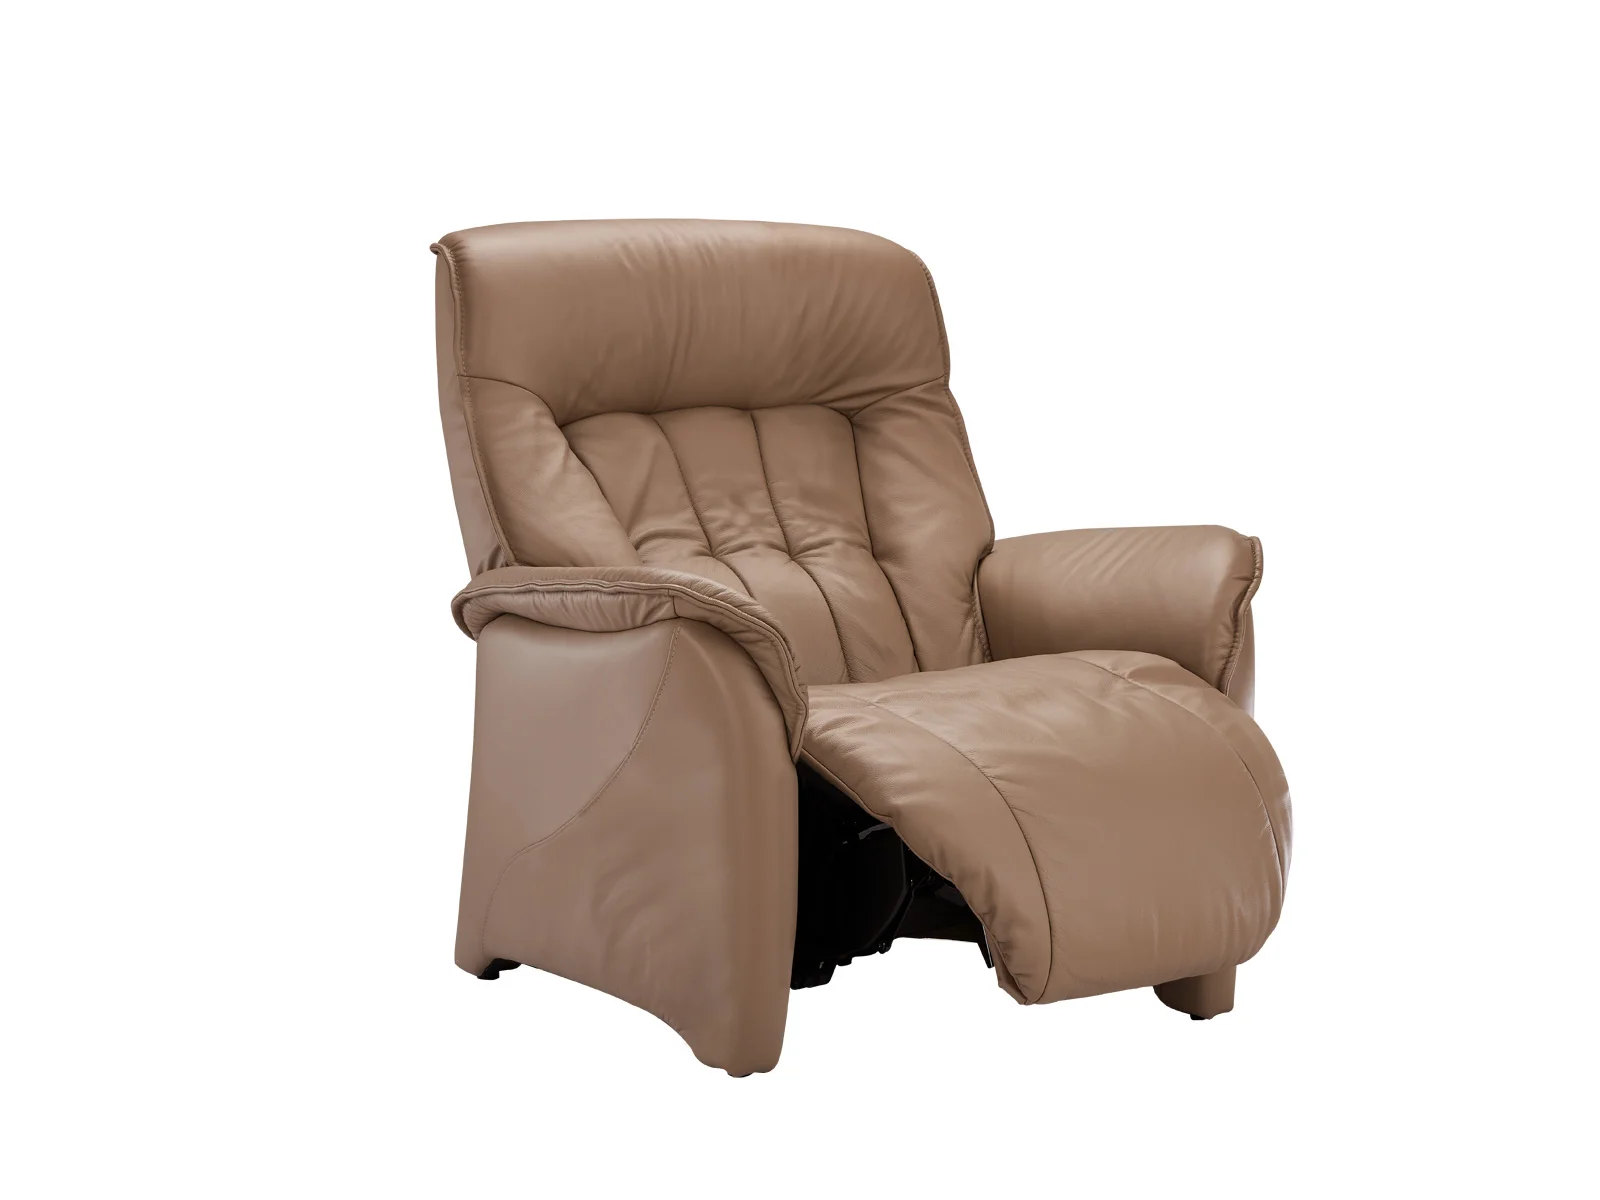 Wide Manual Recliner Chair